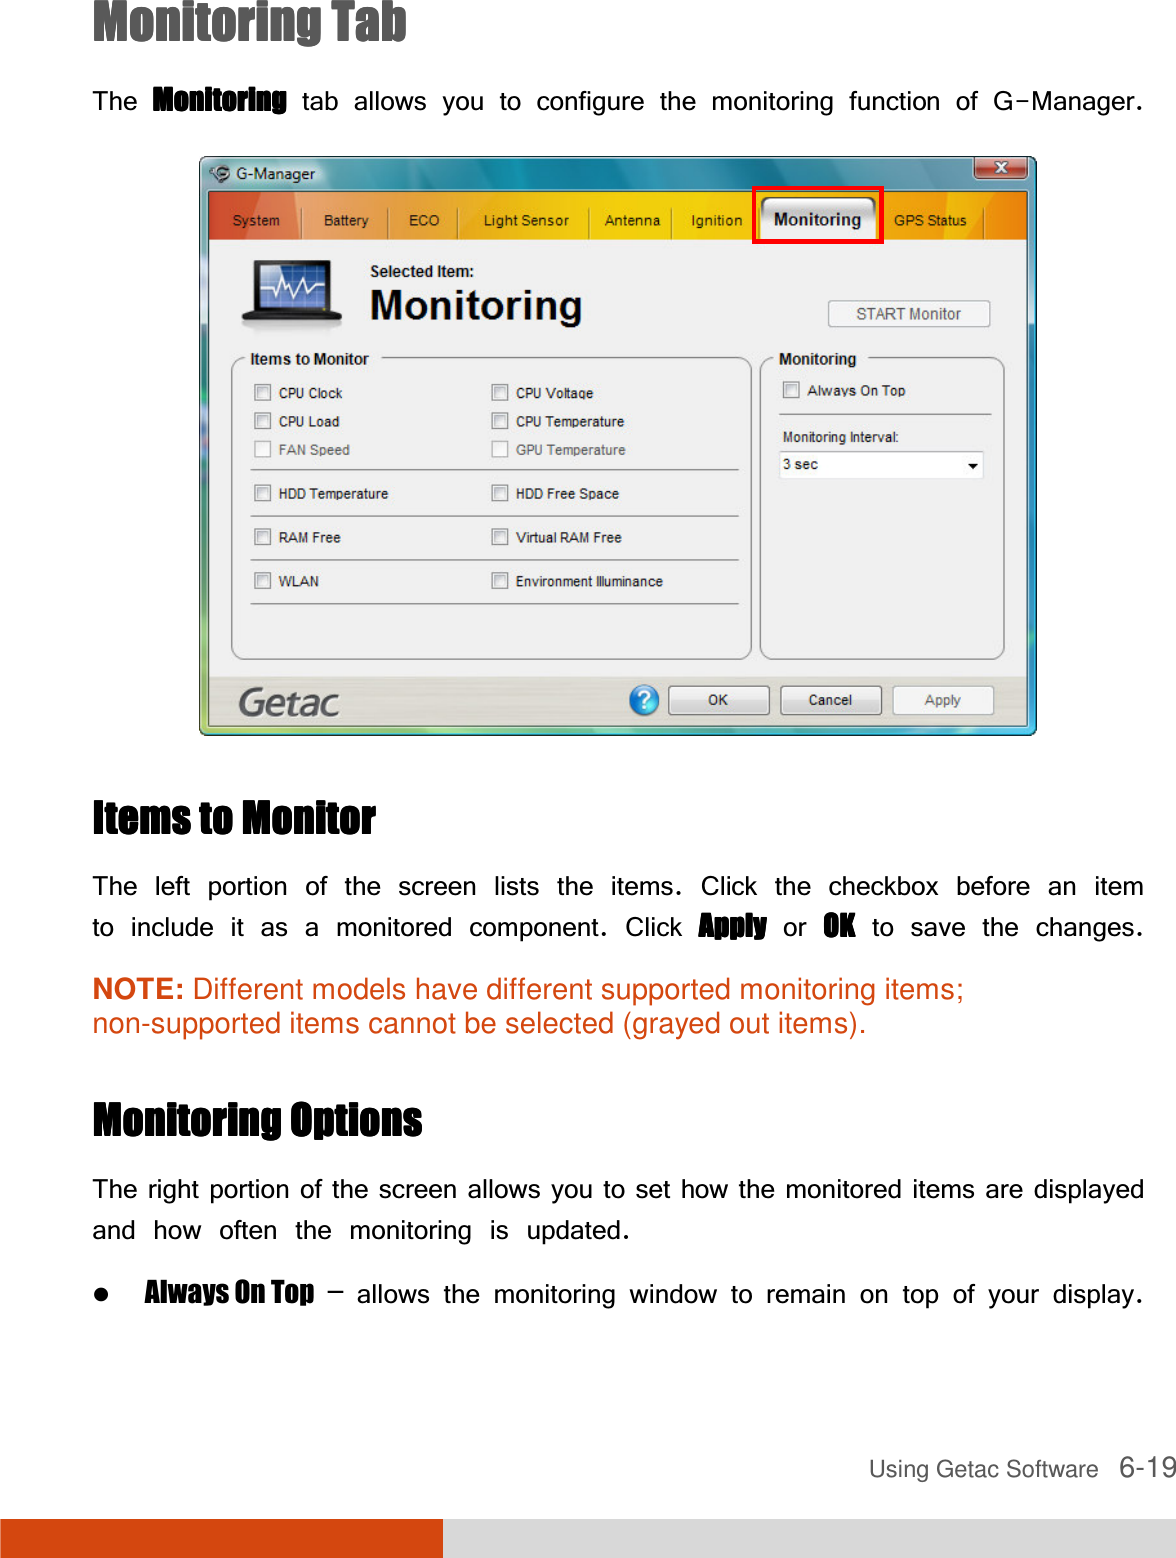 Using Getac Software   6-19Monitoring TabMonitoring TabMonitoring TabMonitoring Tab    The MonitoringMonitoringMonitoringMonitoring tab allows you to configure the monitoring function of G-Manager.  Items to MonitorItems to MonitorItems to MonitorItems to Monitor    The left portion of the screen lists the items. Click the checkbox before an item to include it as a monitored component. Click ApplyApplyApplyApply or OKOKOKOK to save the changes. NOTE: Different models have different supported monitoring items; non-supported items cannot be selected (grayed out items).  Monitoring OptionsMonitoring OptionsMonitoring OptionsMonitoring Options    The right portion of the screen allows you to set how the monitored items are displayed and how often the monitoring is updated. Always On Top – allows the monitoring window to remain on top of your display. 